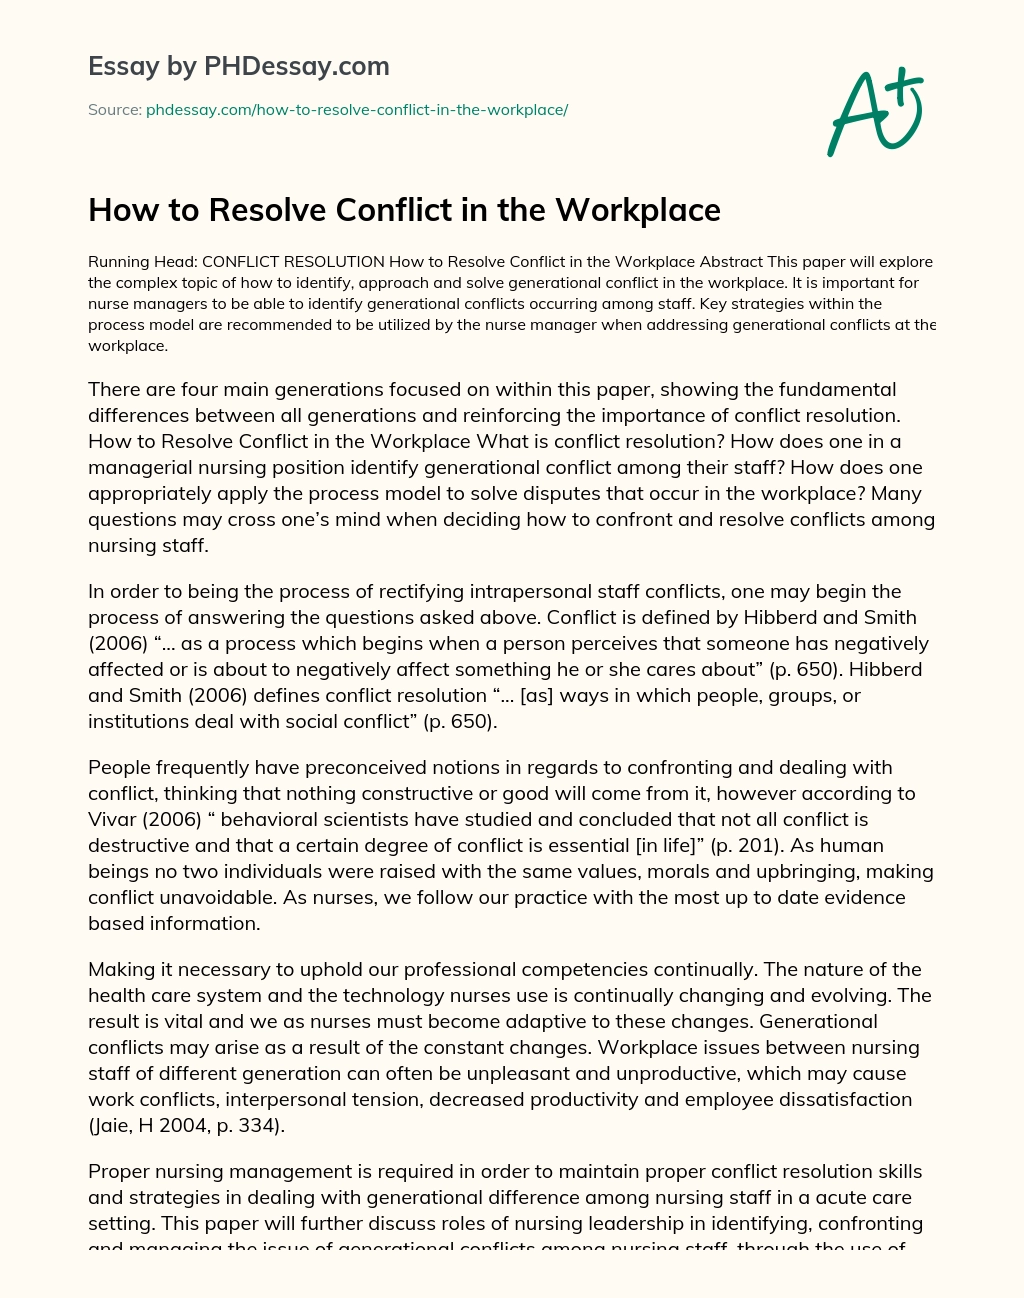 How to Resolve Conflict in the Workplace essay